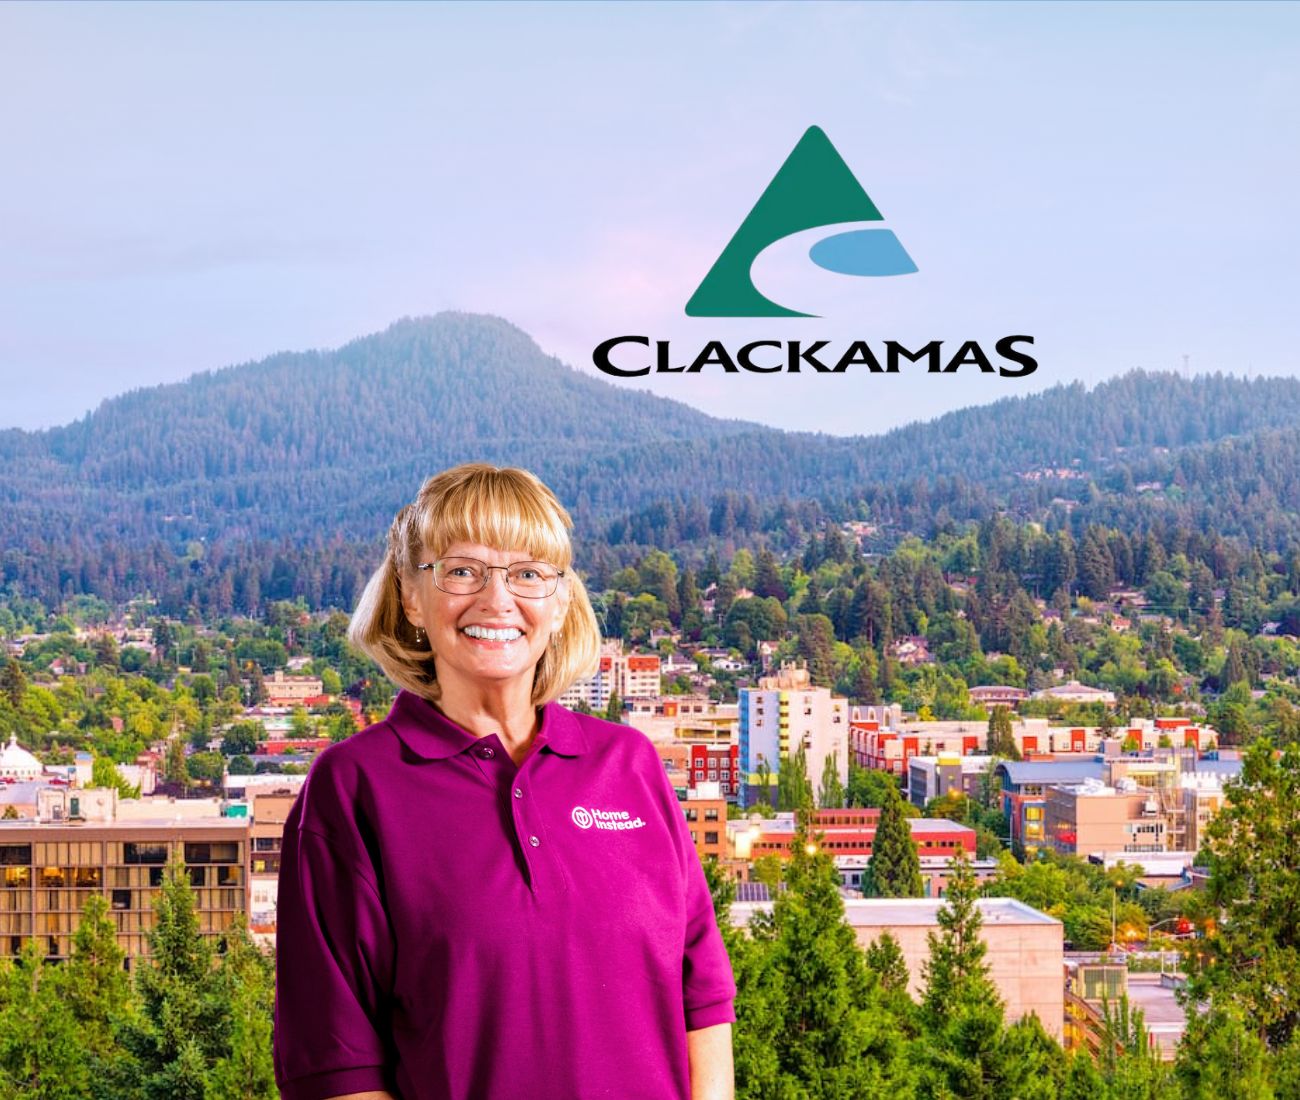 home instead caregiver with clackamas oregon in the background